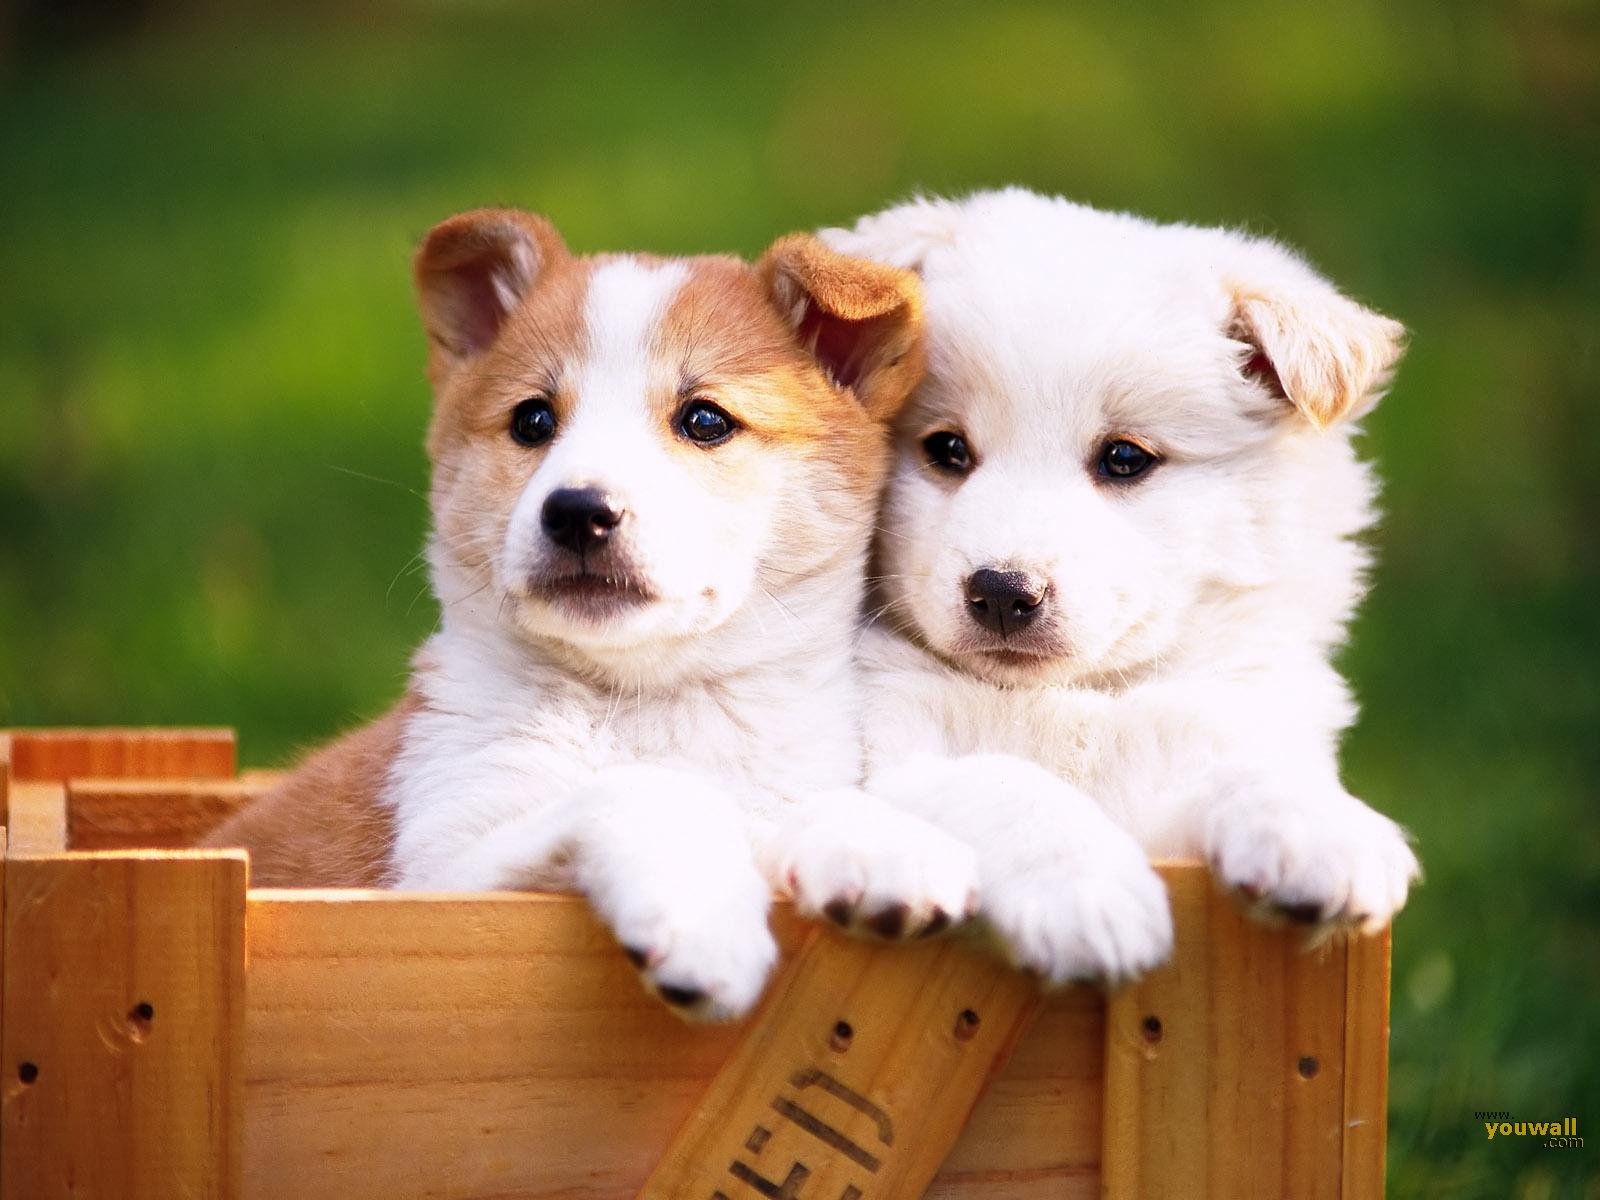 Dogs And Animal Image - Good Morning Image With Dog - HD Wallpaper 